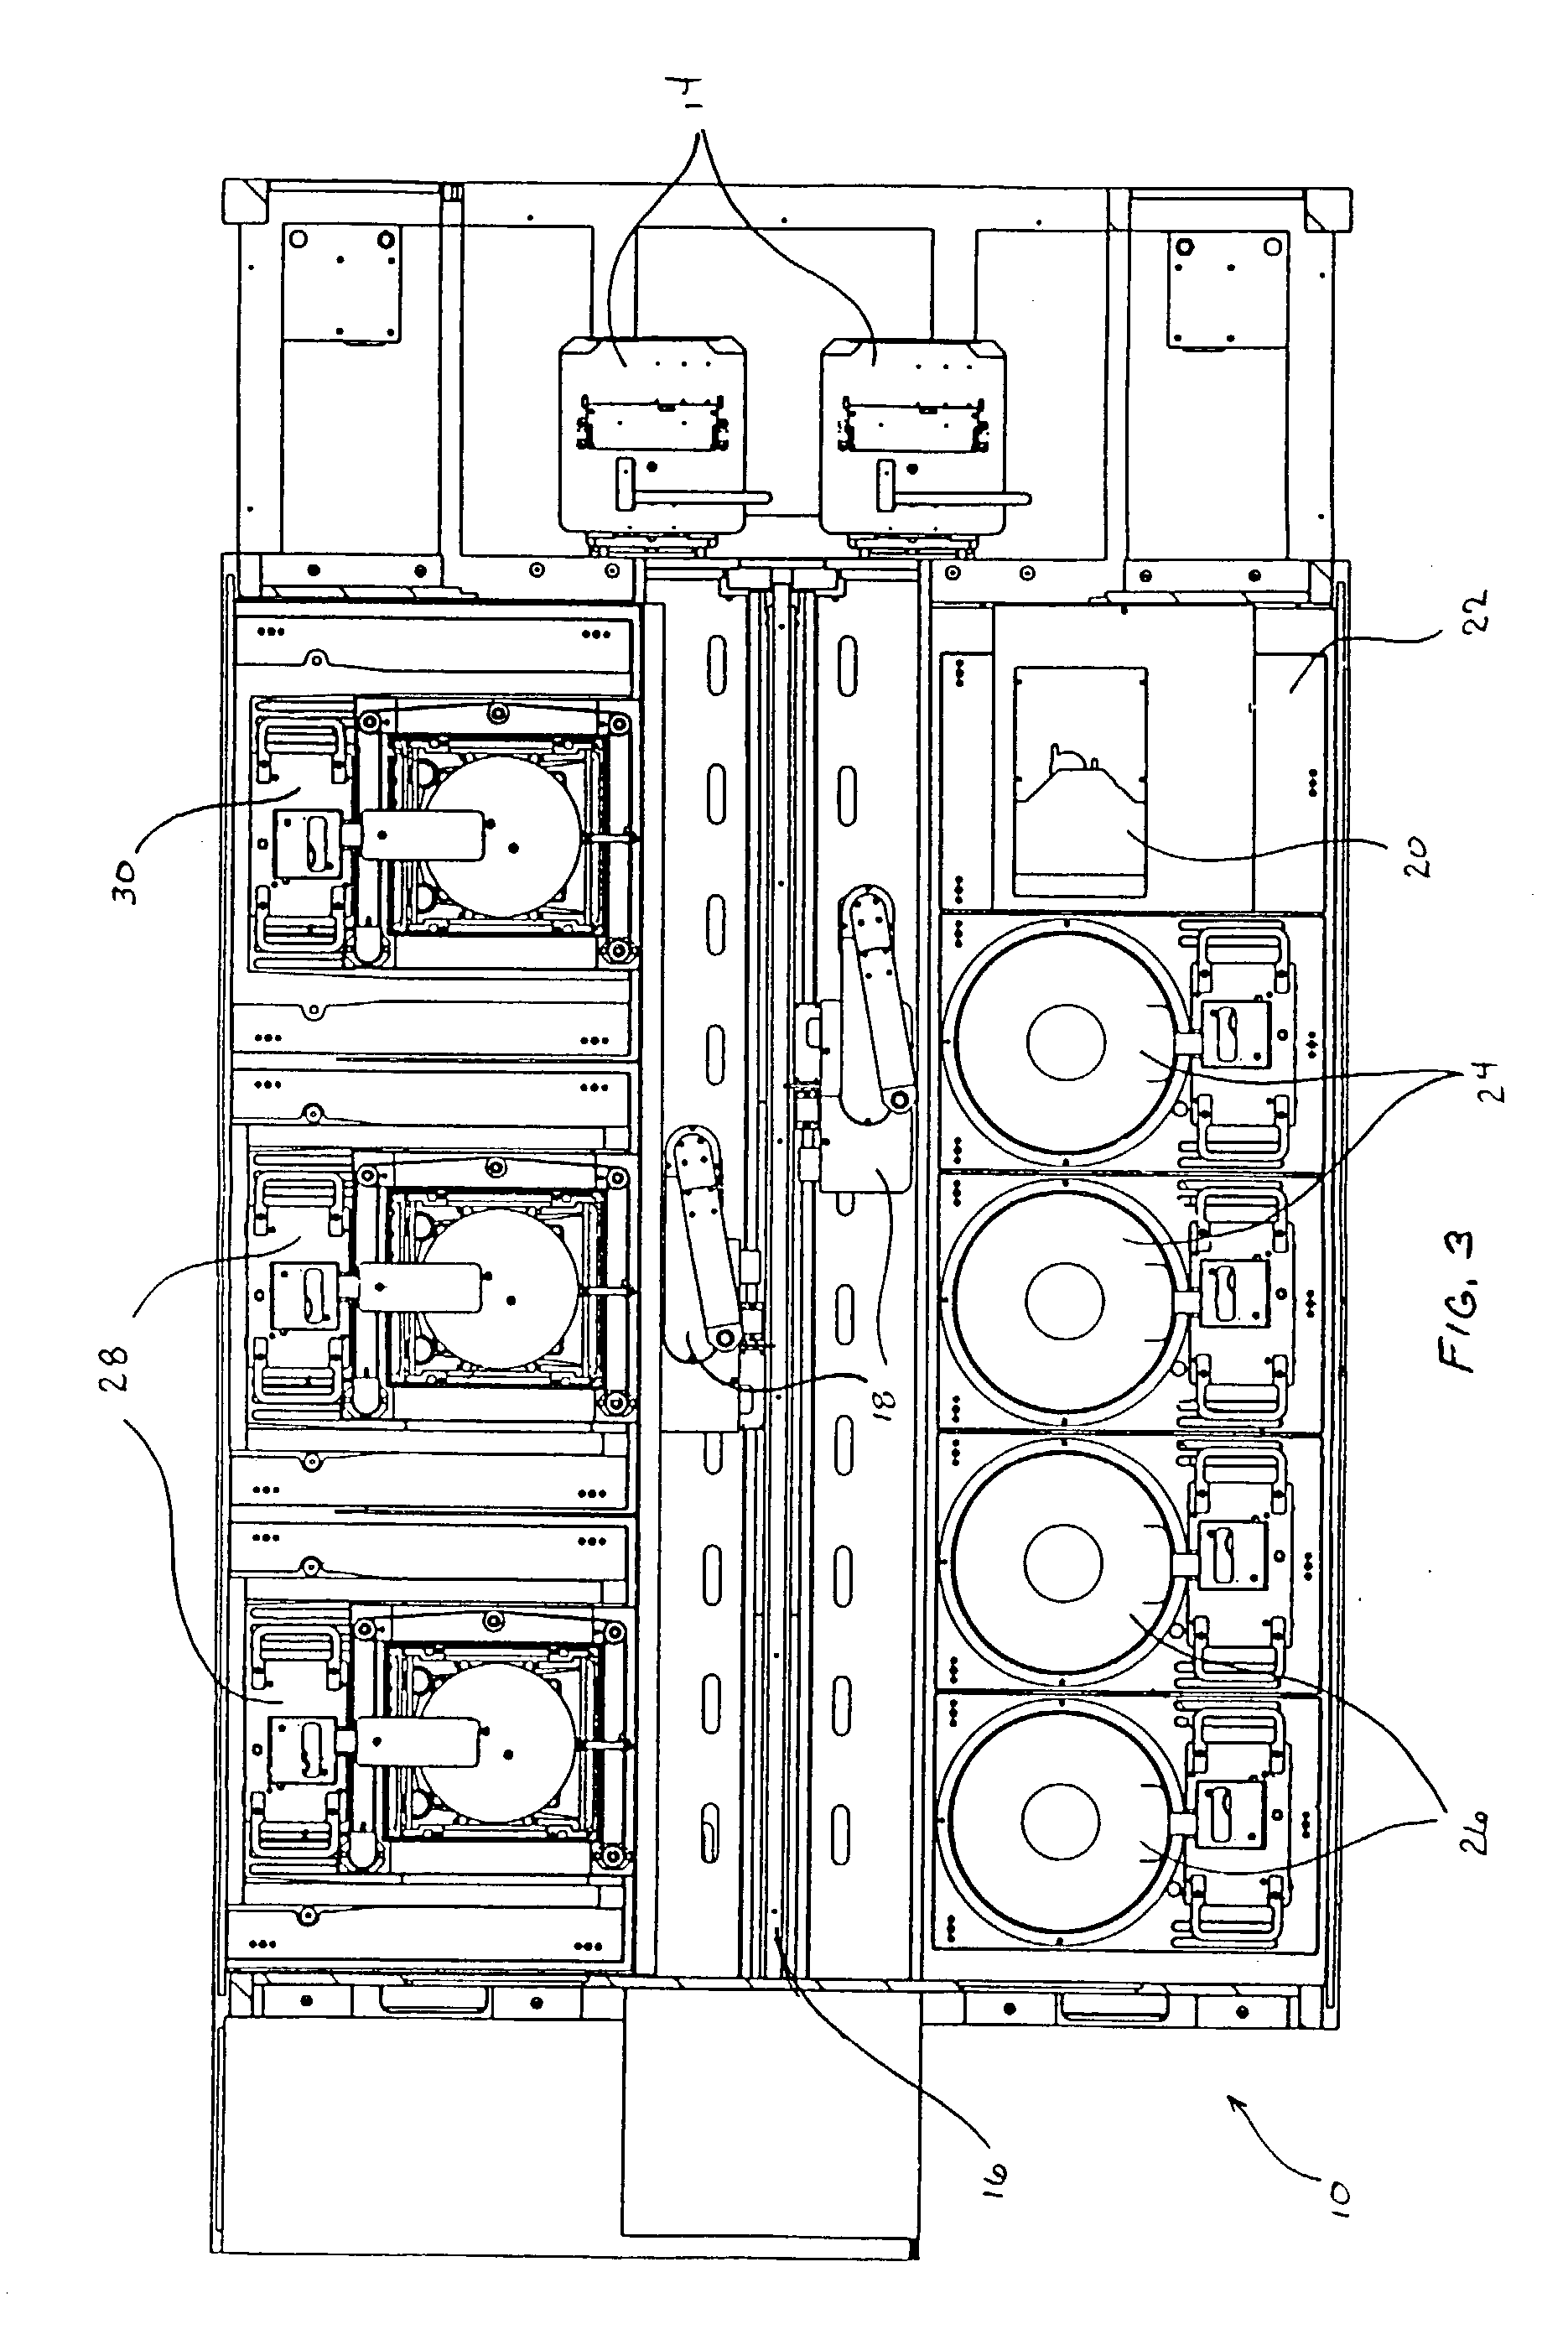 Microelectronic workpiece processing tool including a processing reactor having a paddle assembly for agitation of a processing fluid proximate to the workpiece